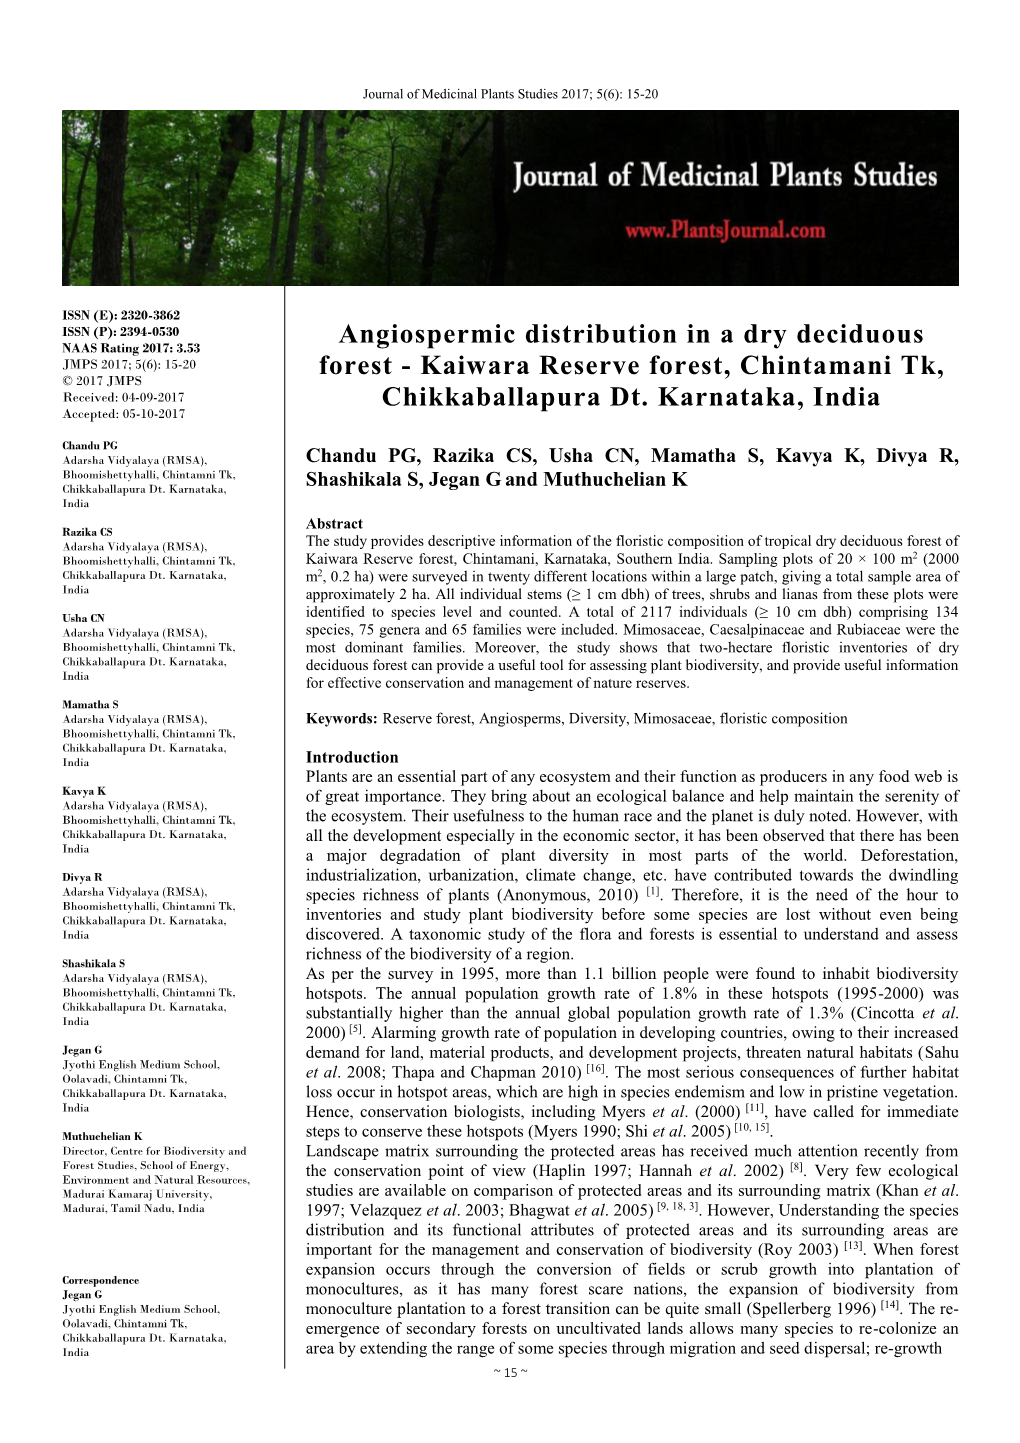 Angiospermic Distribution in a Dry Deciduous Forest